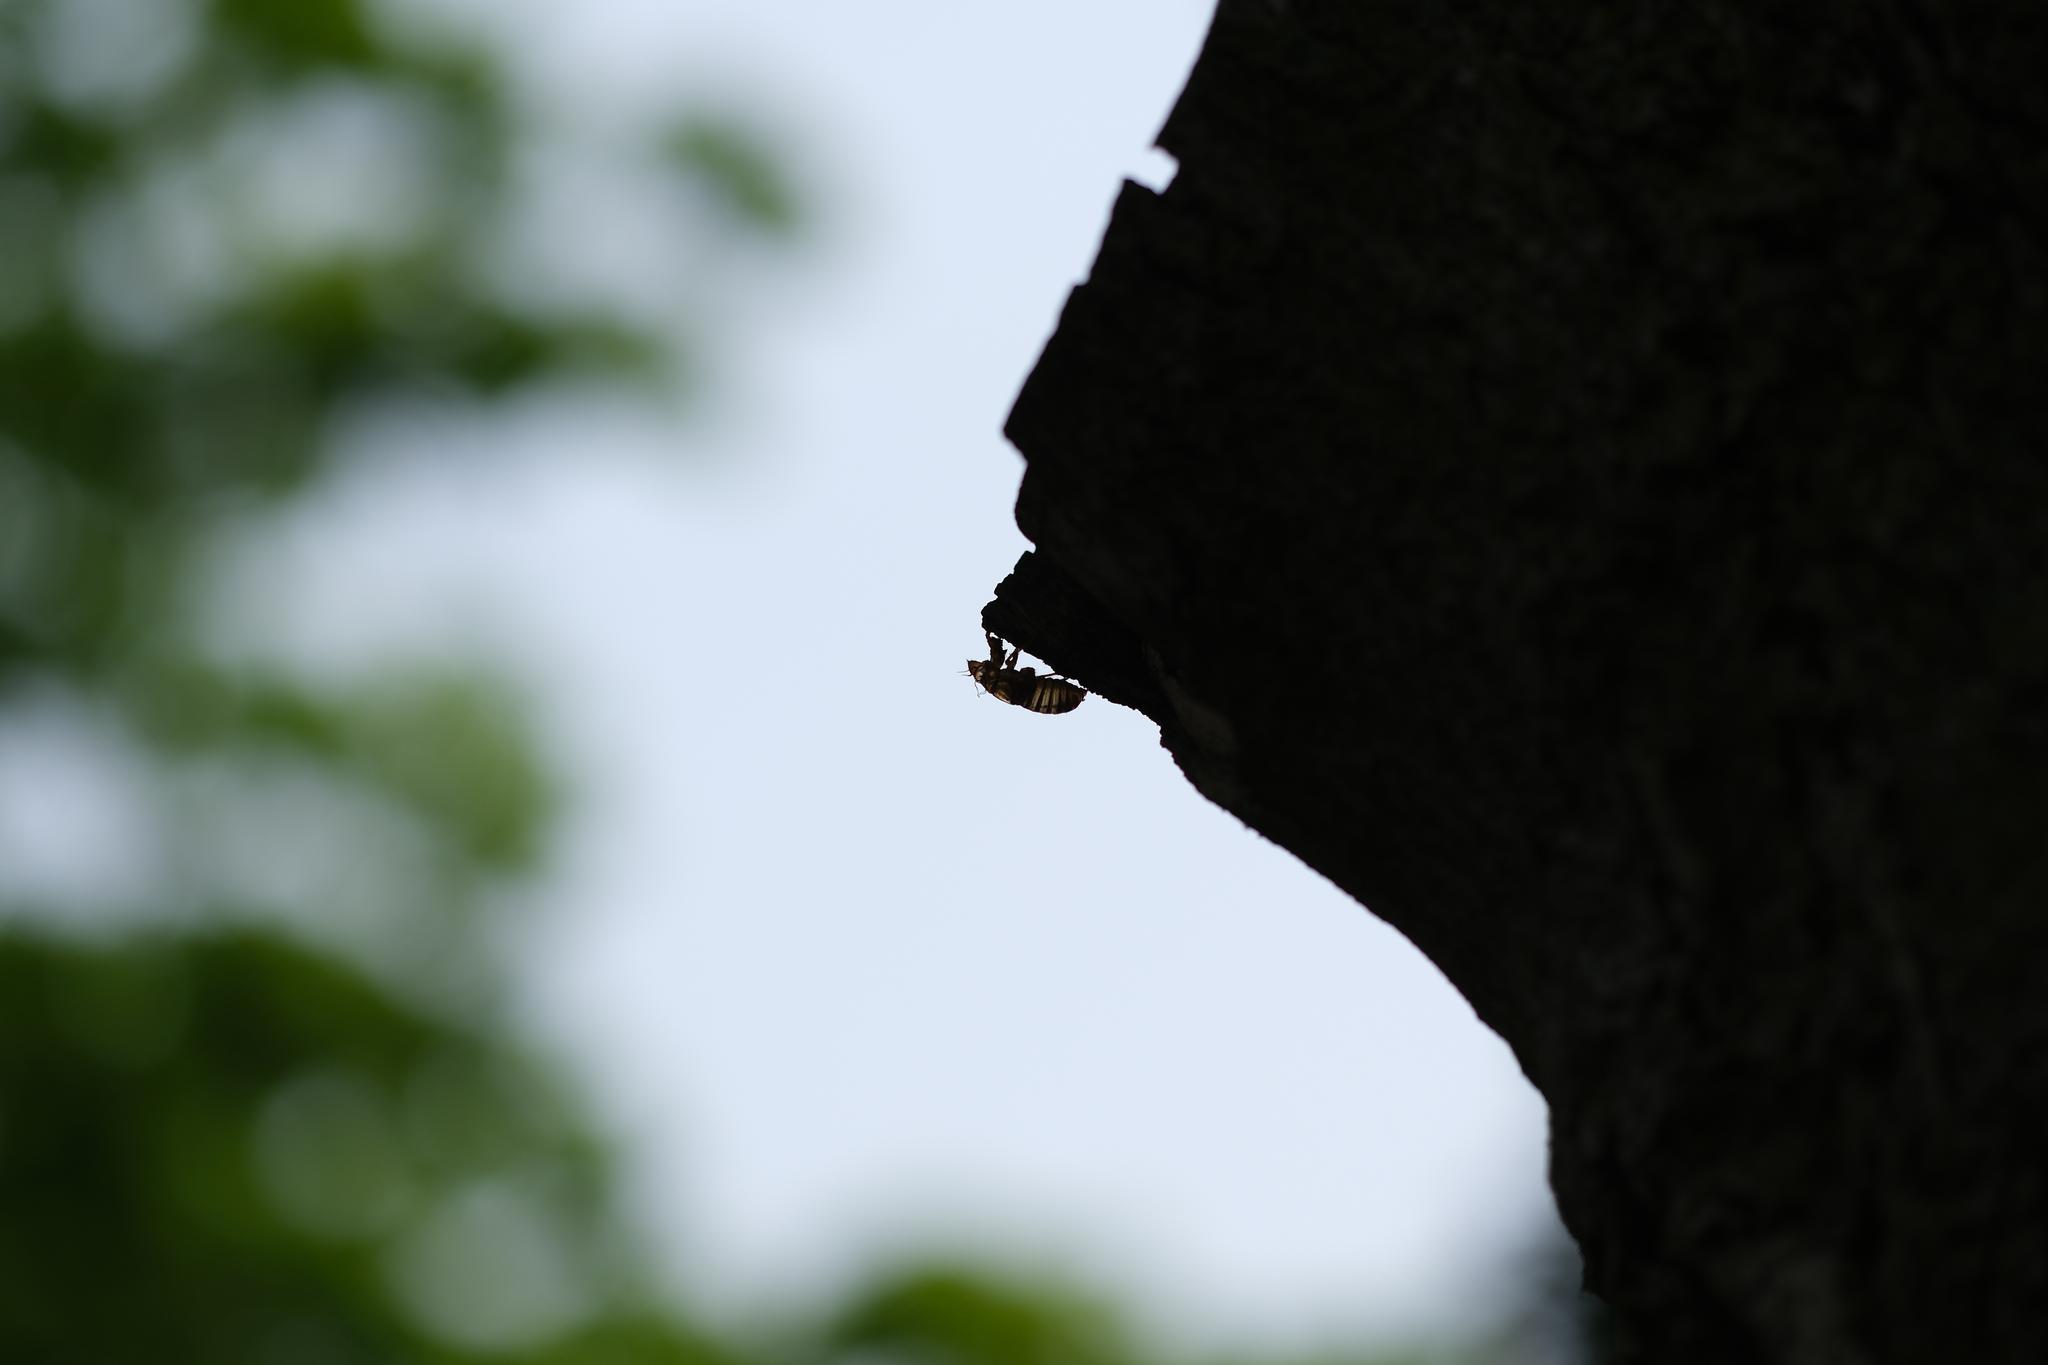 A silhouette of a tree trunk with a single water droplet hanging from its edge against a blurred green background